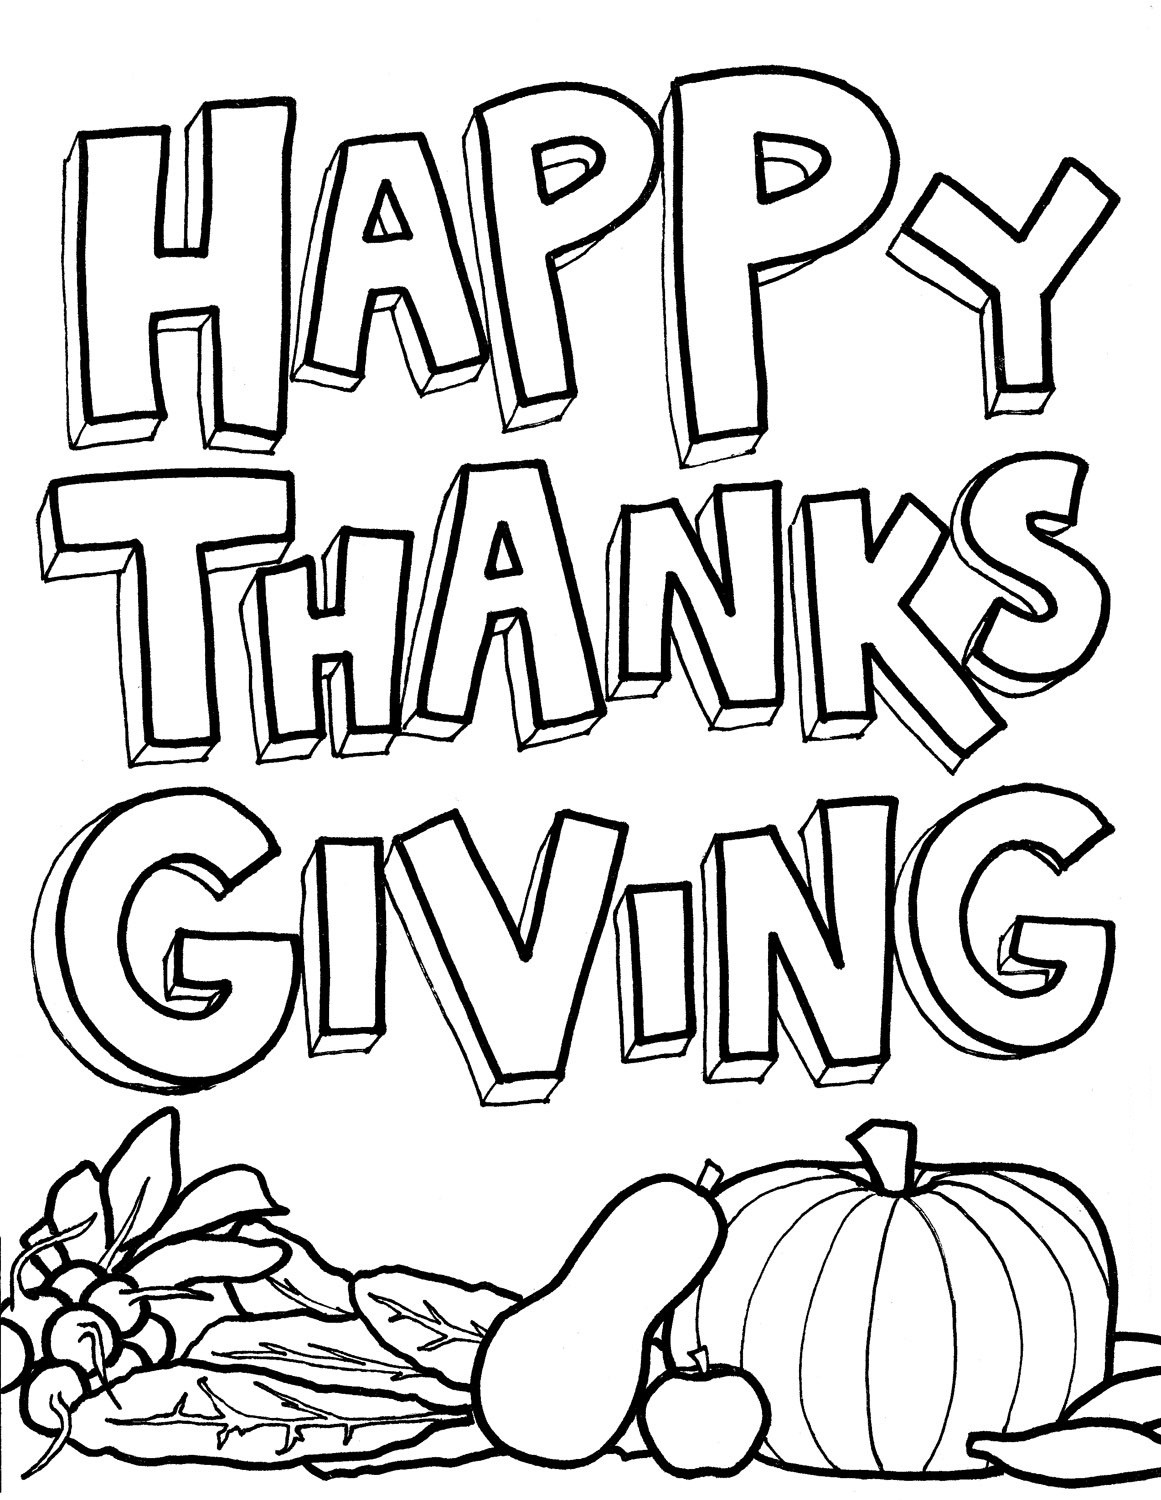 Happy Thanksgiving Coloring Pages For Boys
 Thanksgiving Day Coloring Pages for childrens printable